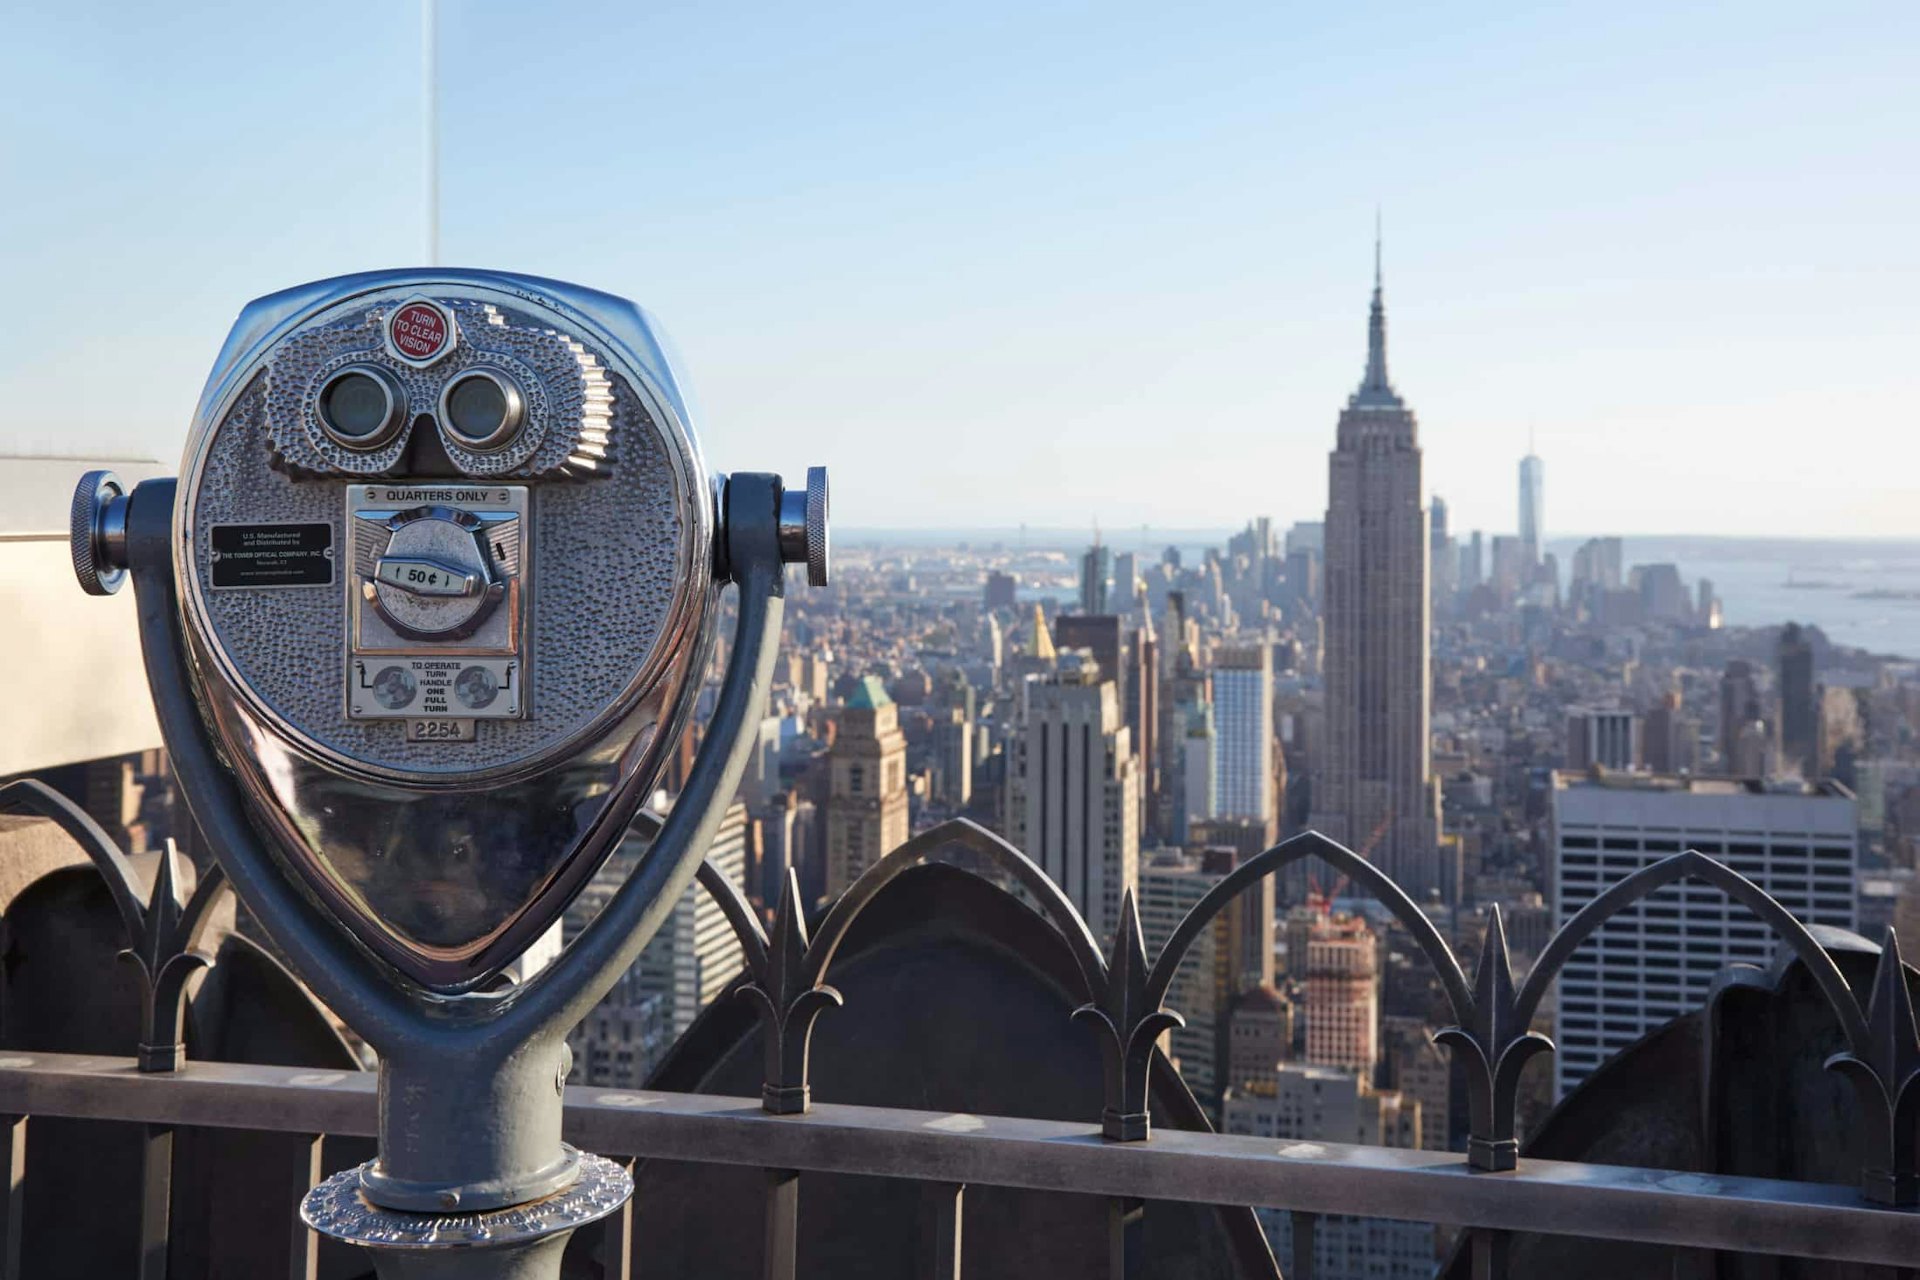 Binoculars on Rockefeller Center with Empire State Building and city view at the end of the day in New York